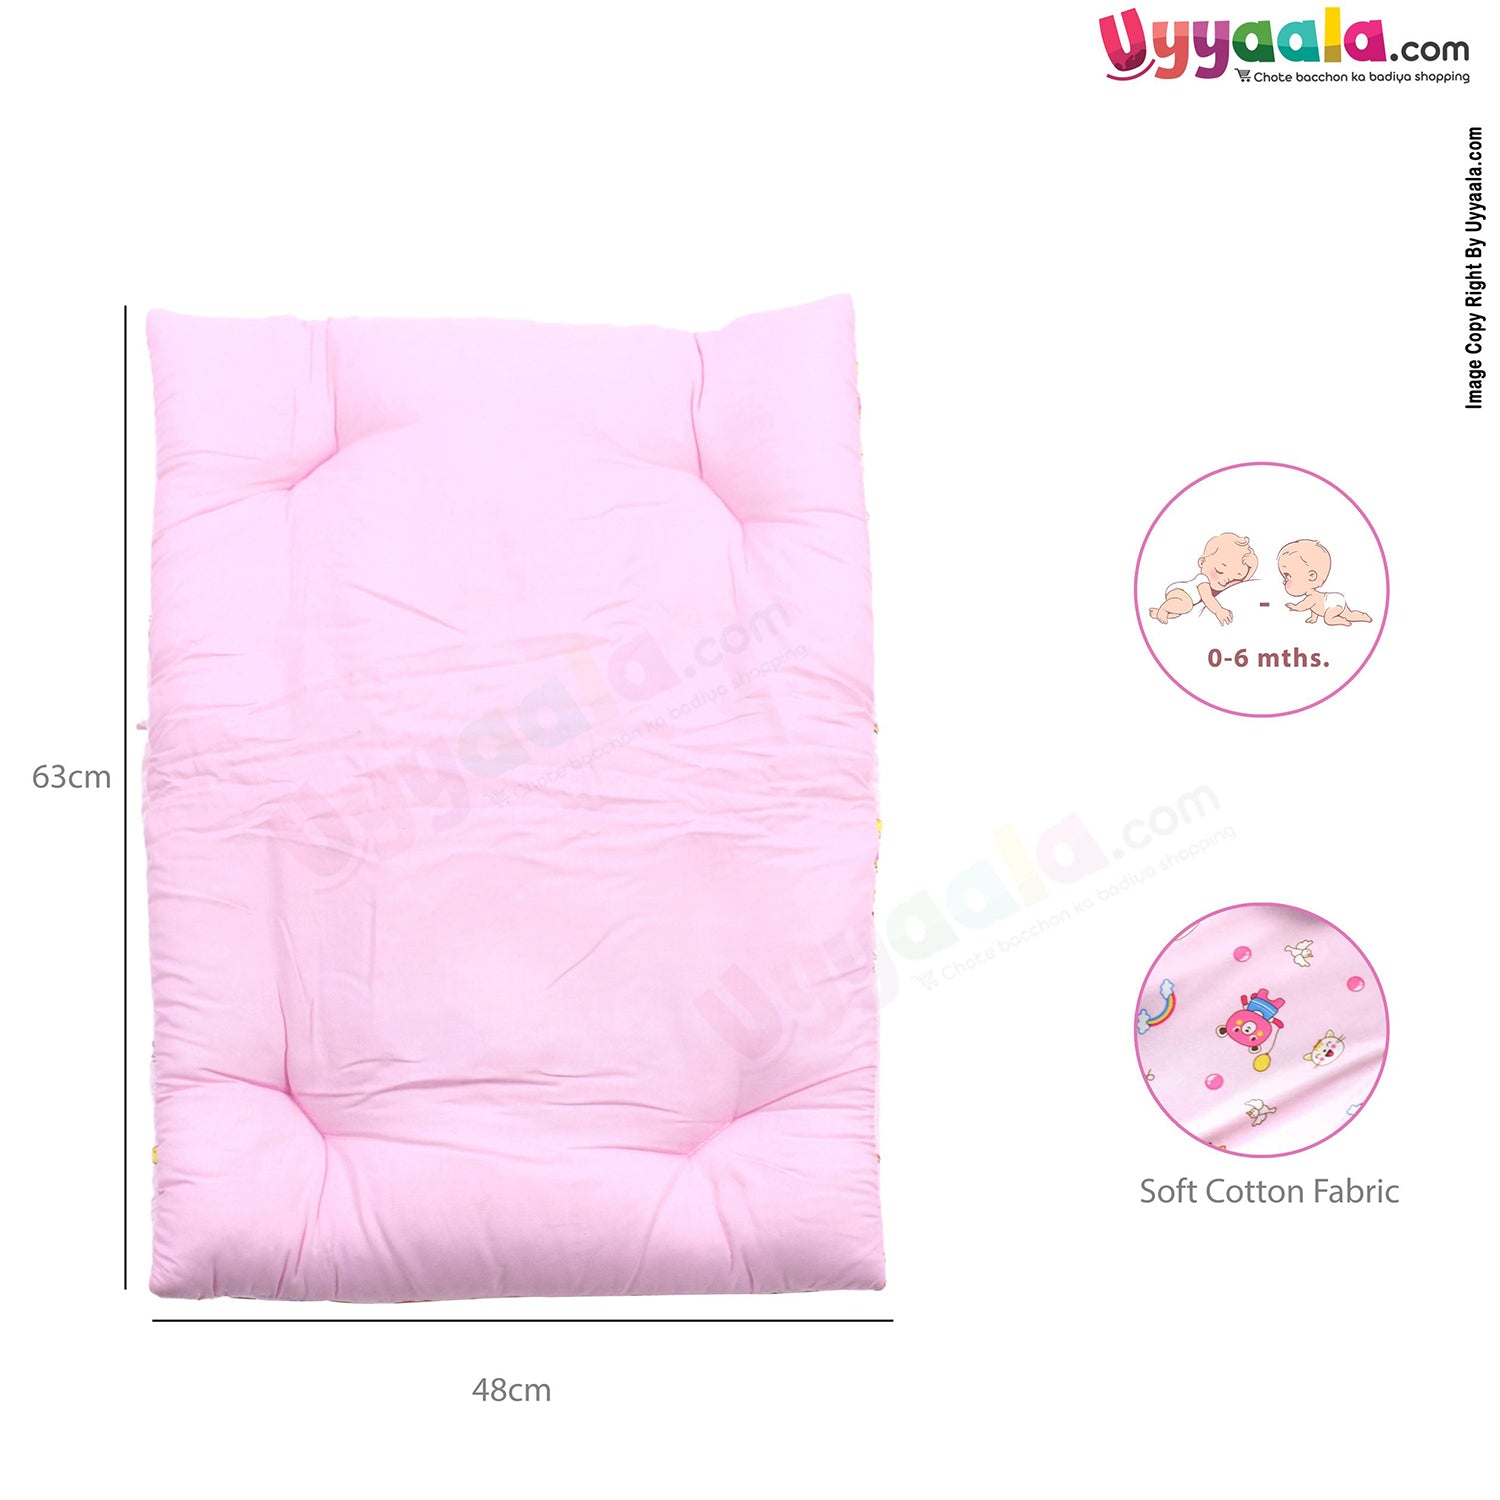 Baby velvet Bedding Set of 4 with Bolster and Pillow, Bear Print 0-6m Age - Pink-uyyala-com.myshopify.com-Bedding-Happy Babies